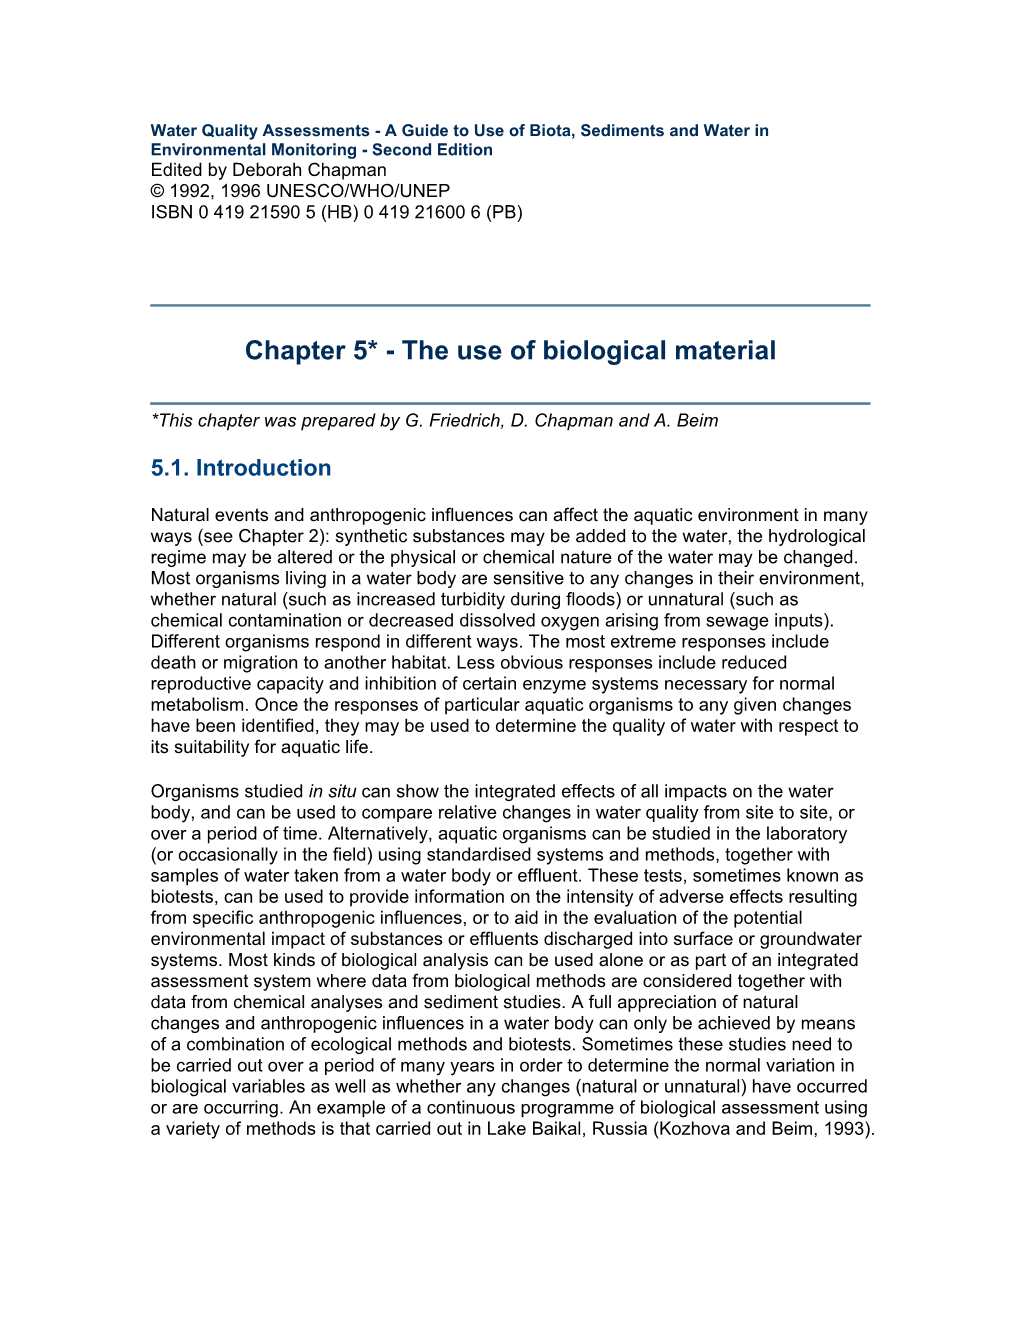 Chapter 5* - the Use of Biological Material